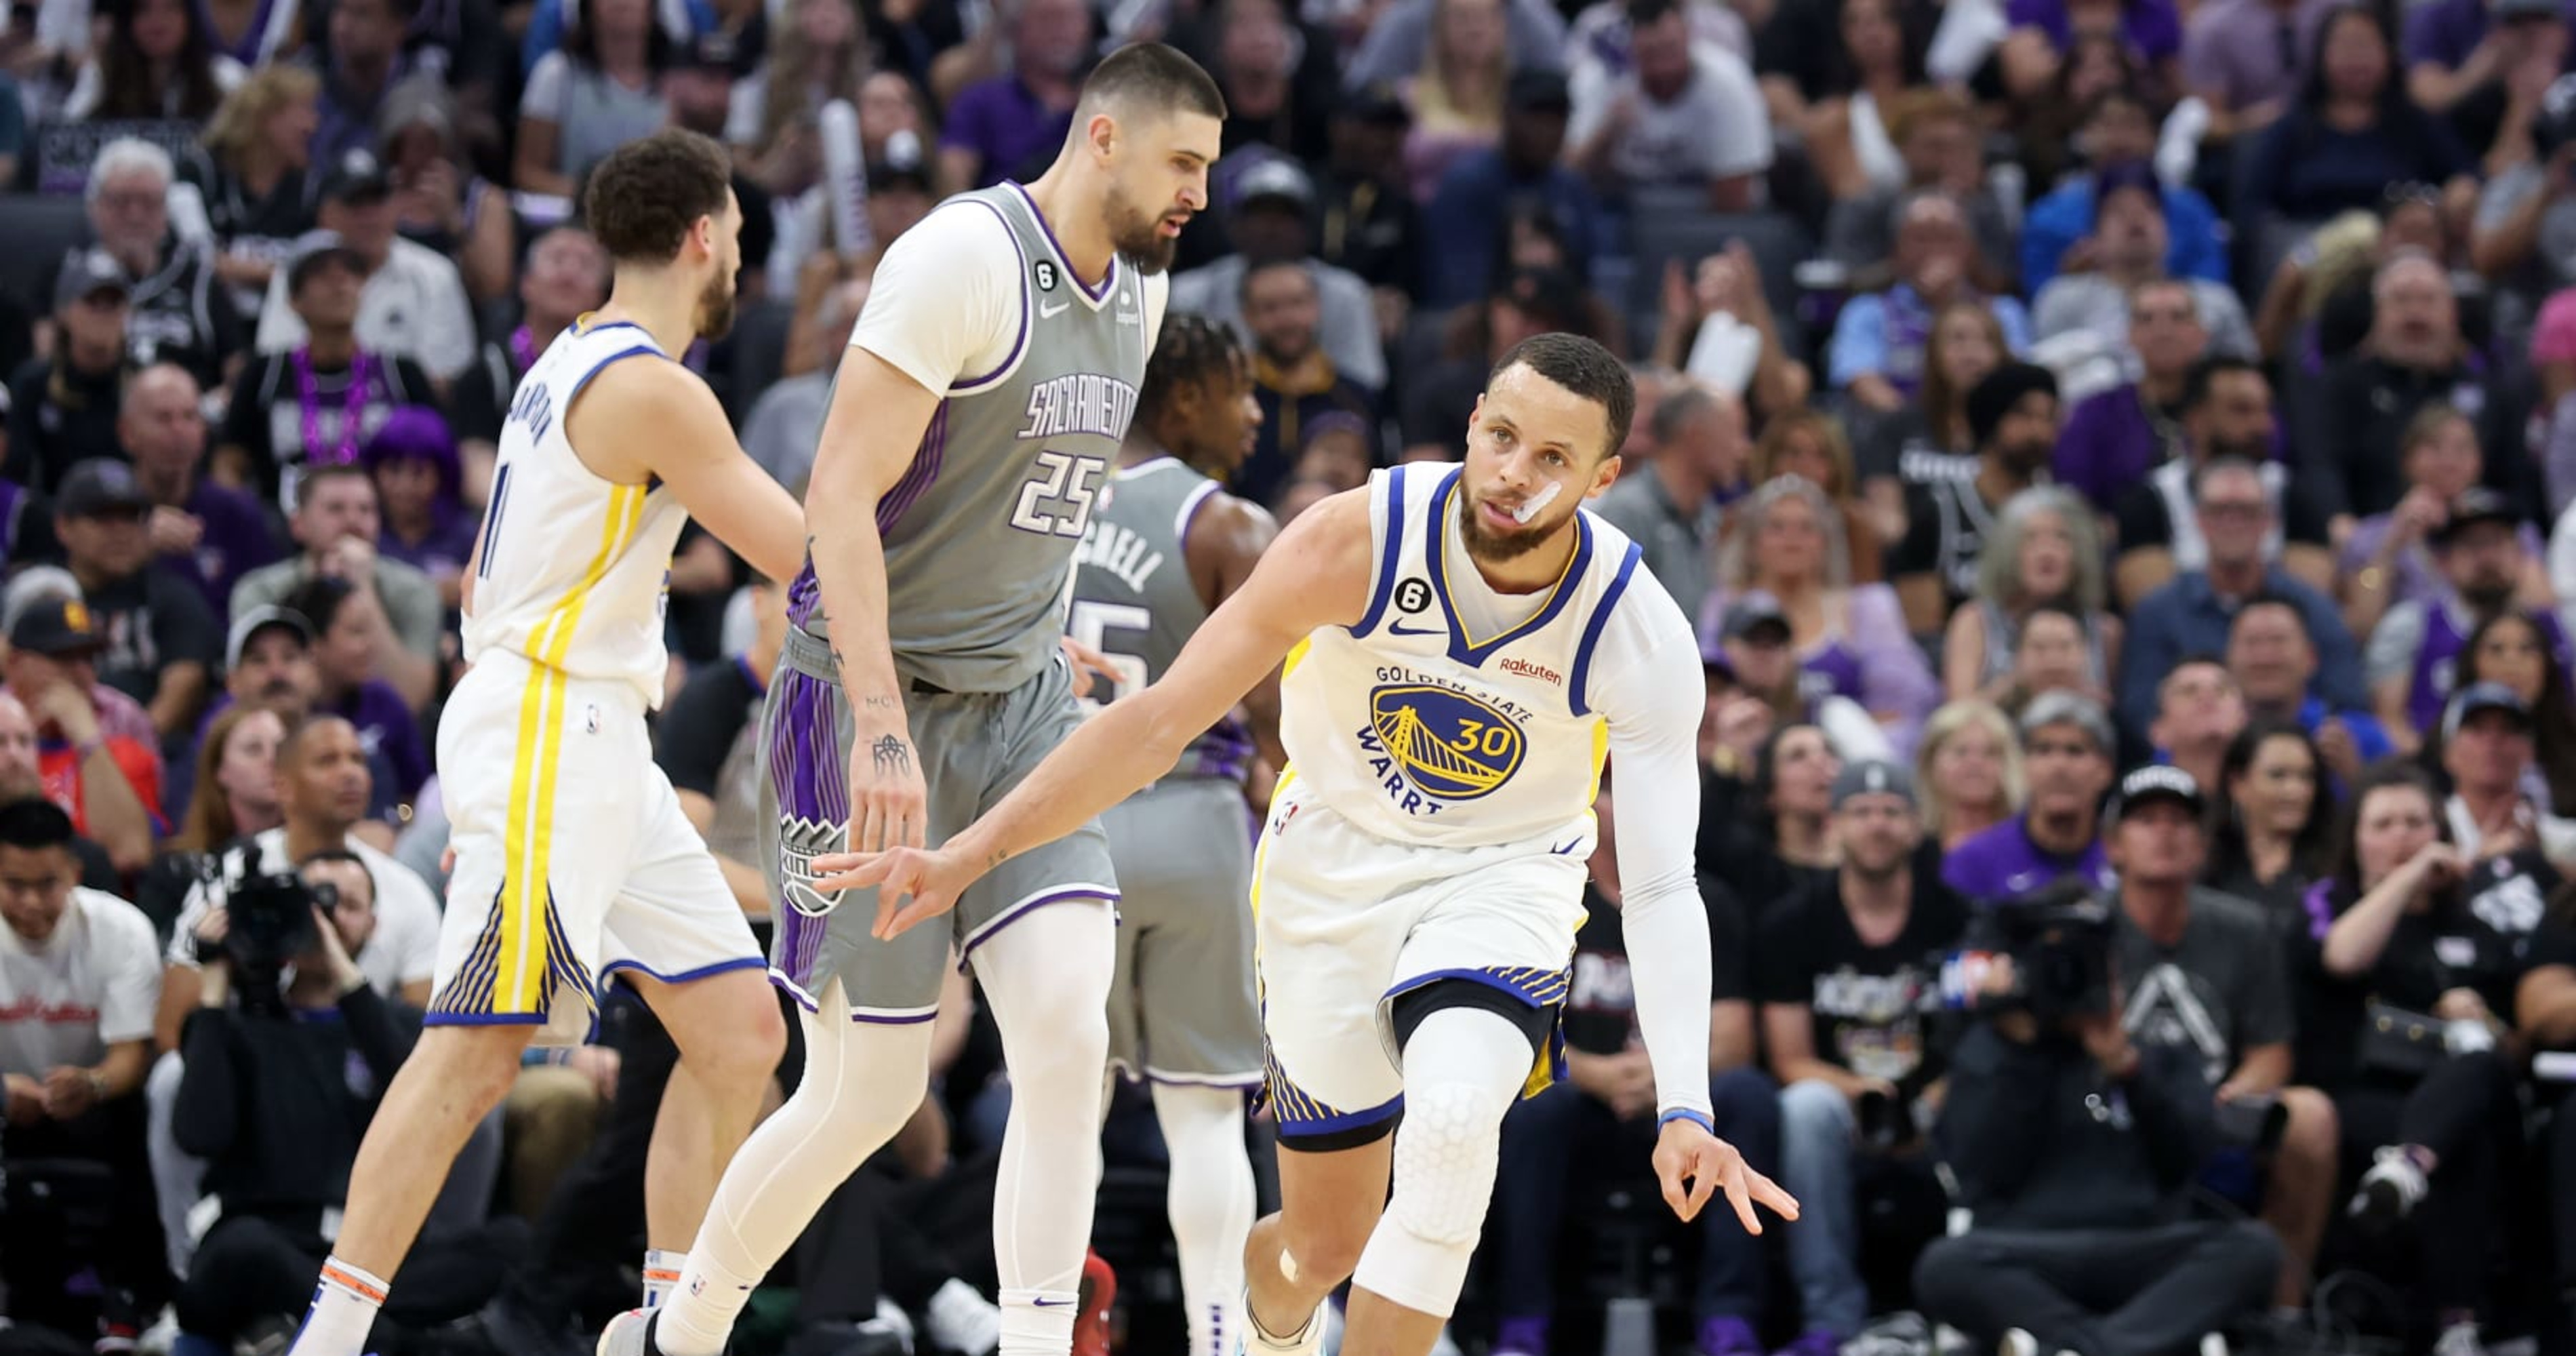 Steph Curry Praised by Fans for Clutch Play as Warriors Hold Off De